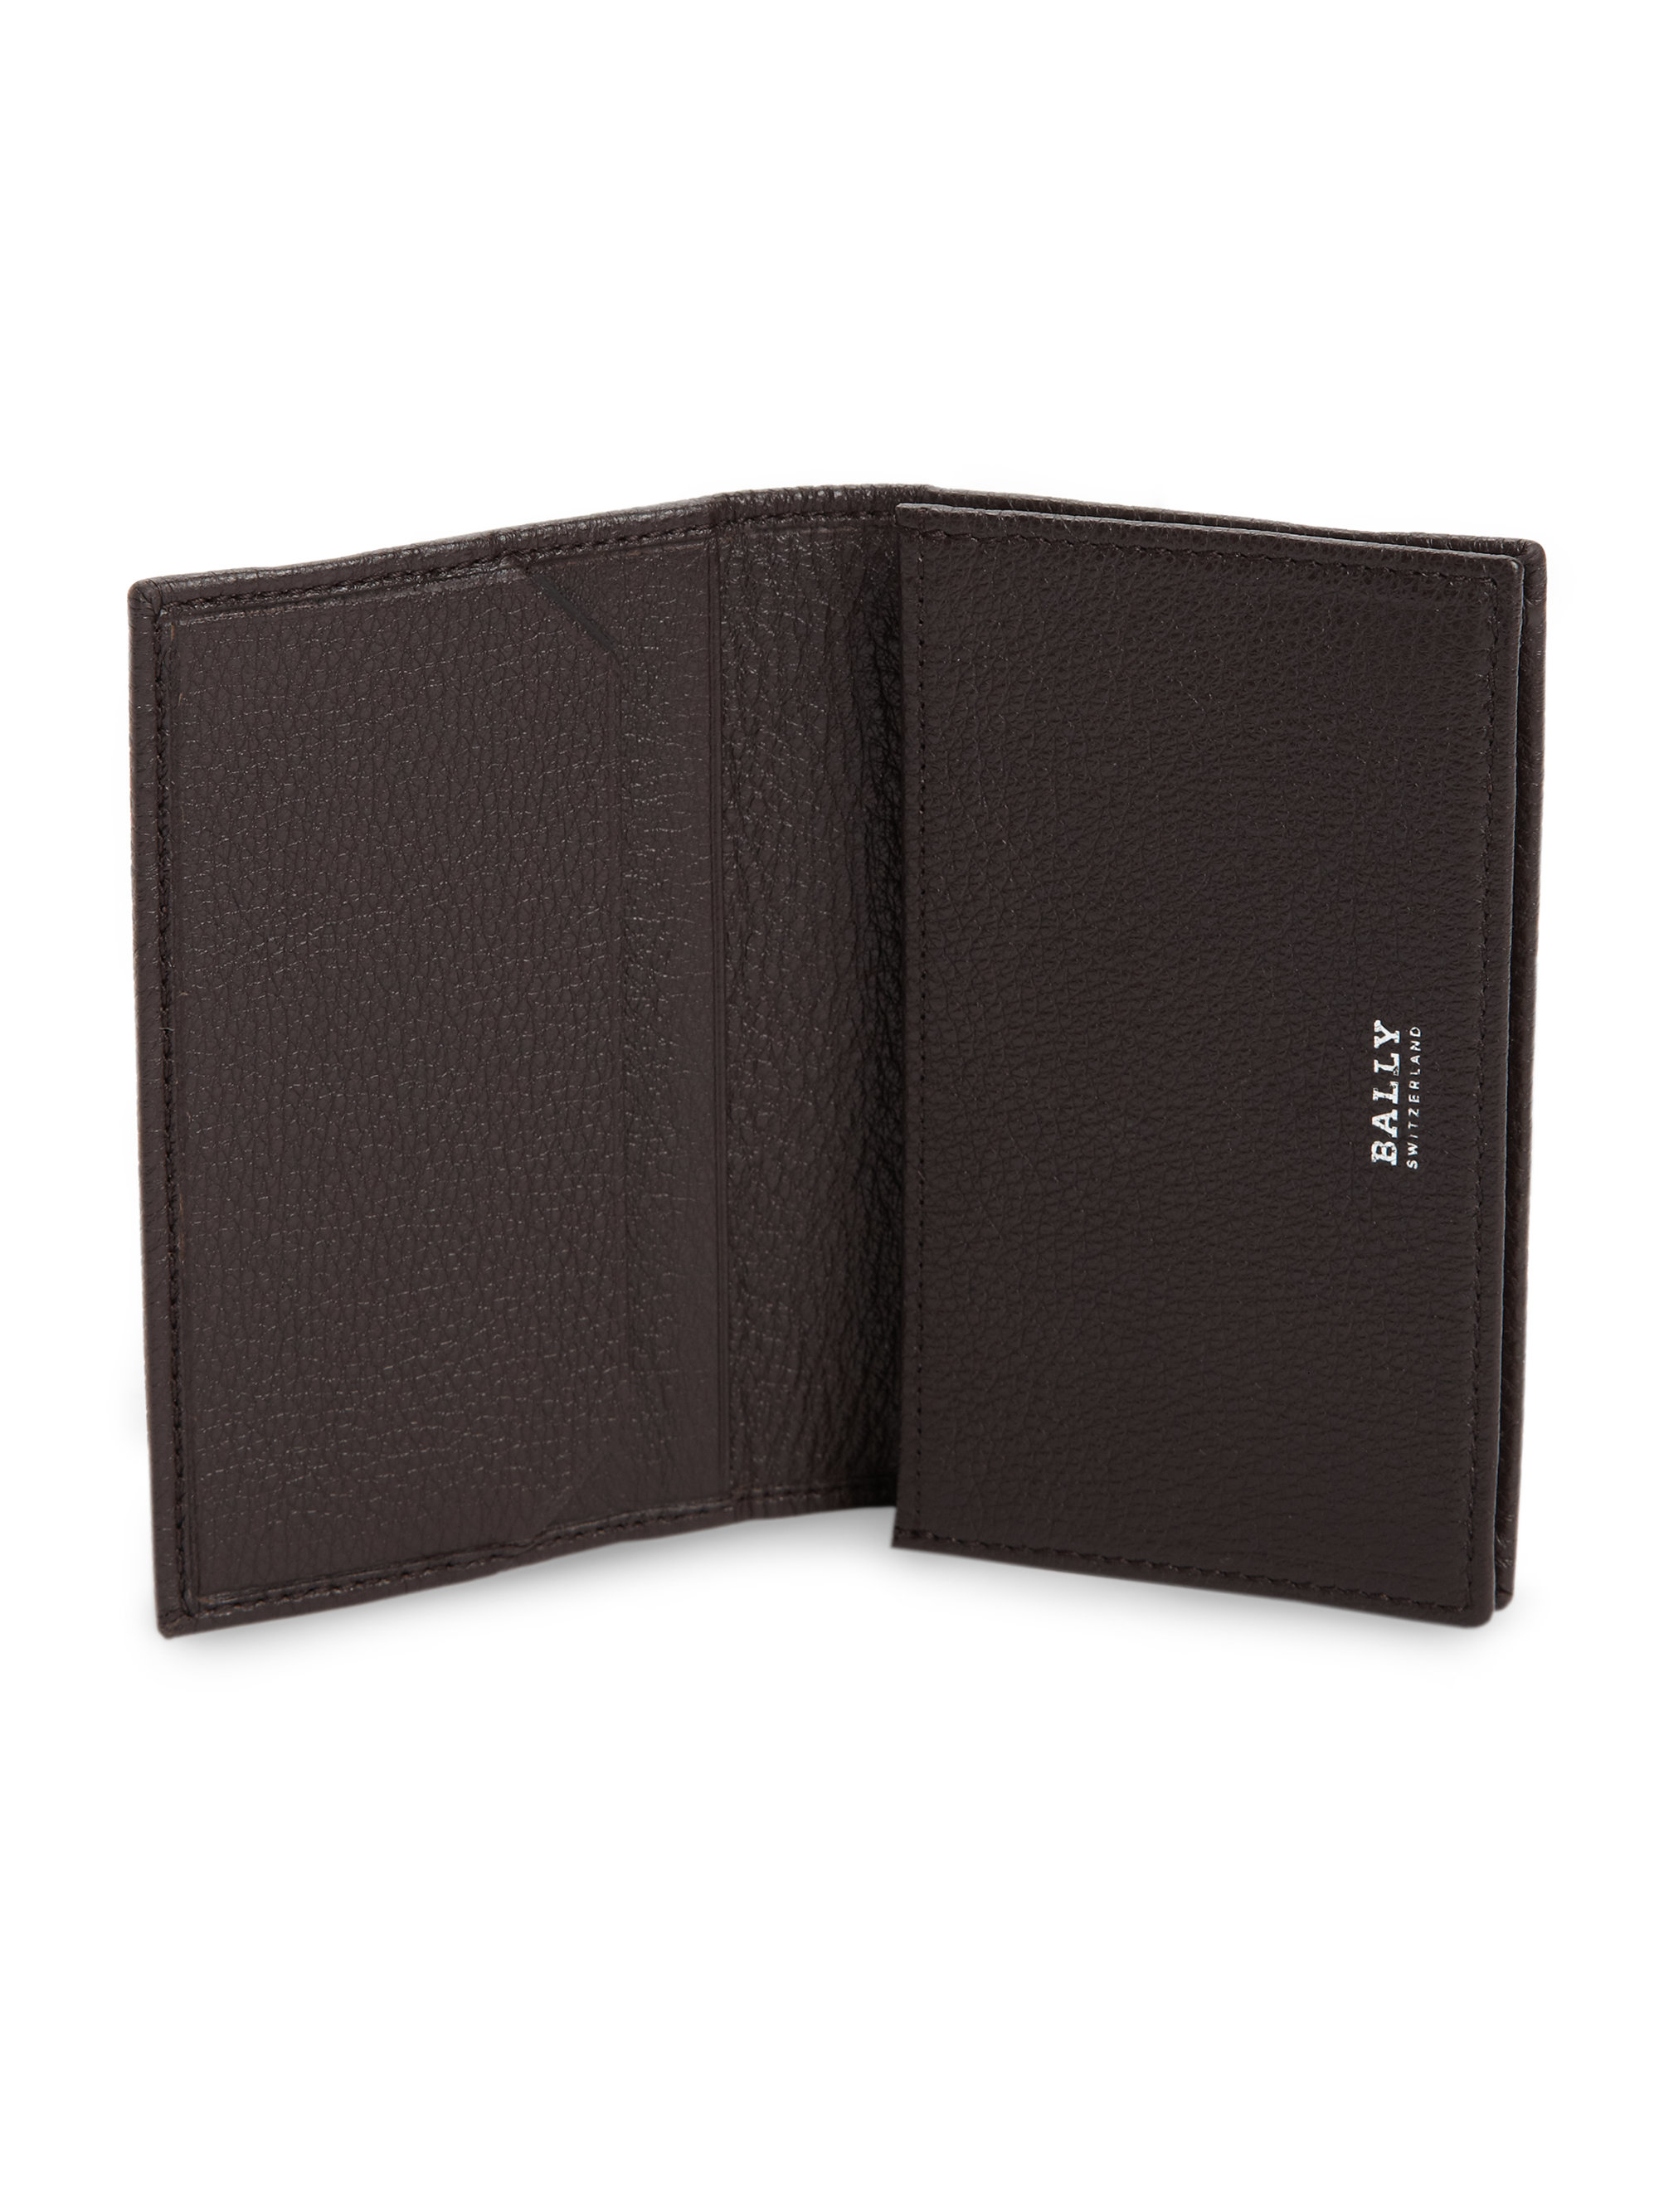 Bally Leather Bifold Wallet in Chocolate (Brown) for Men - Lyst